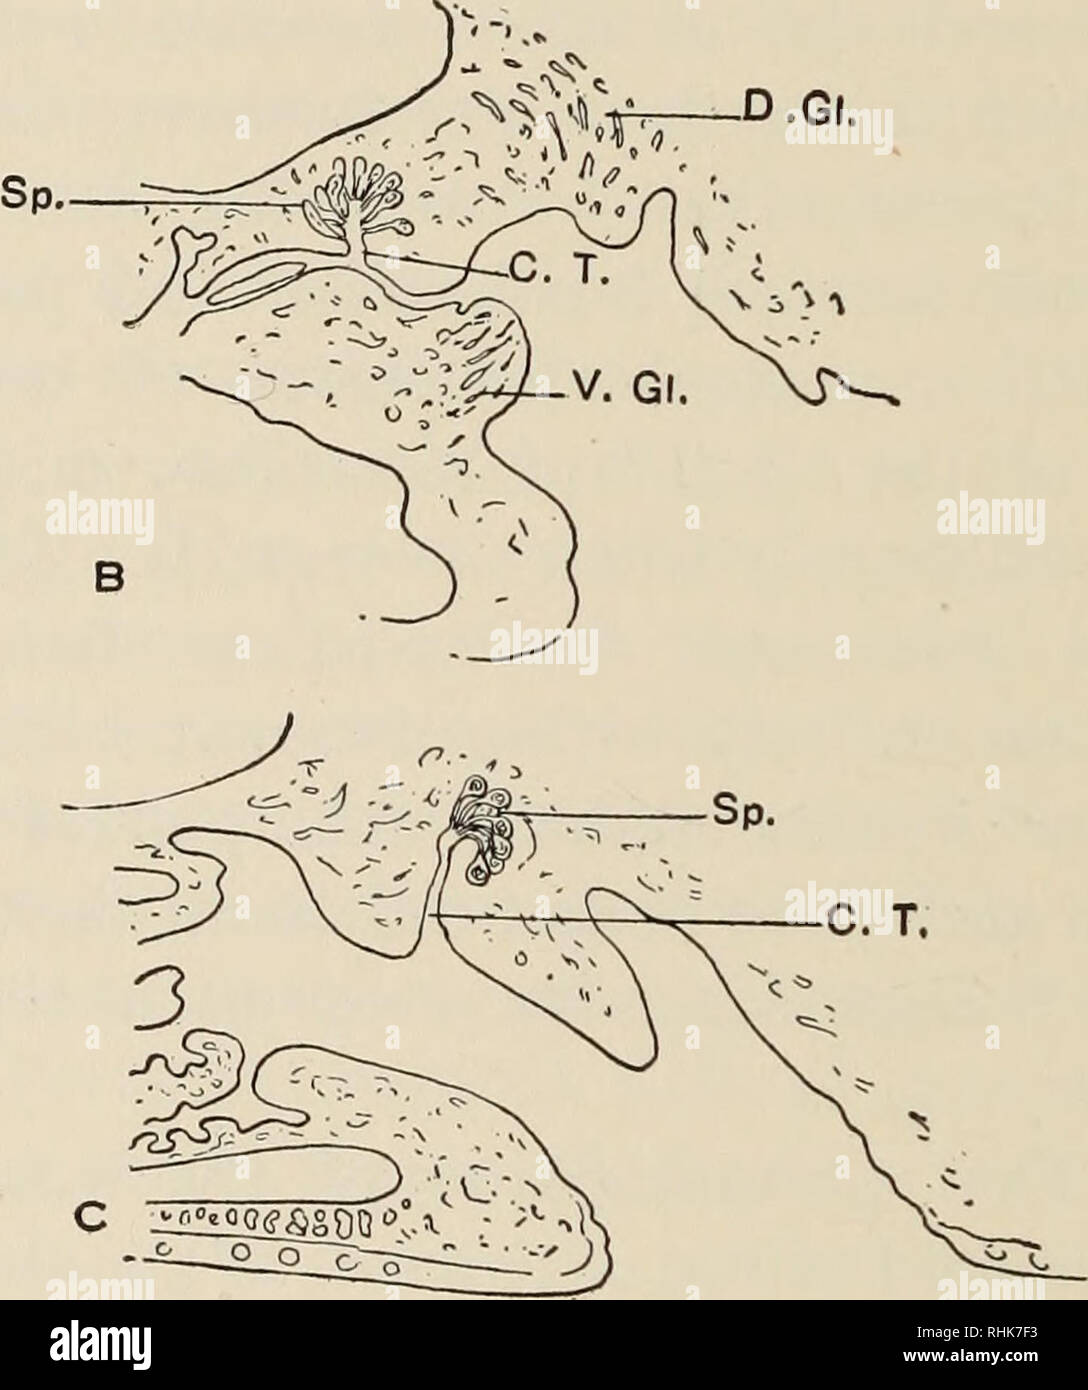 . The biology of the amphibia. Amphibians. D.GI. In the cloaca of the female salamander all three sets of glands may appear, although here they have different functions. The pelvic gland serves as a res- ervoir for the spermatozoa which migrate from the dis- integrating spermatophore held between the lips of the cloaca to these tubules in the roof of the cloaca (Noble and Weber, 1929). The cloacal glands which are present in all ambystomids, salamandrids, and primitive plethodontids, may play some part in egg- capsule formation. The ab- dominal glands are also de- veloped in female newts. They Stock Photo